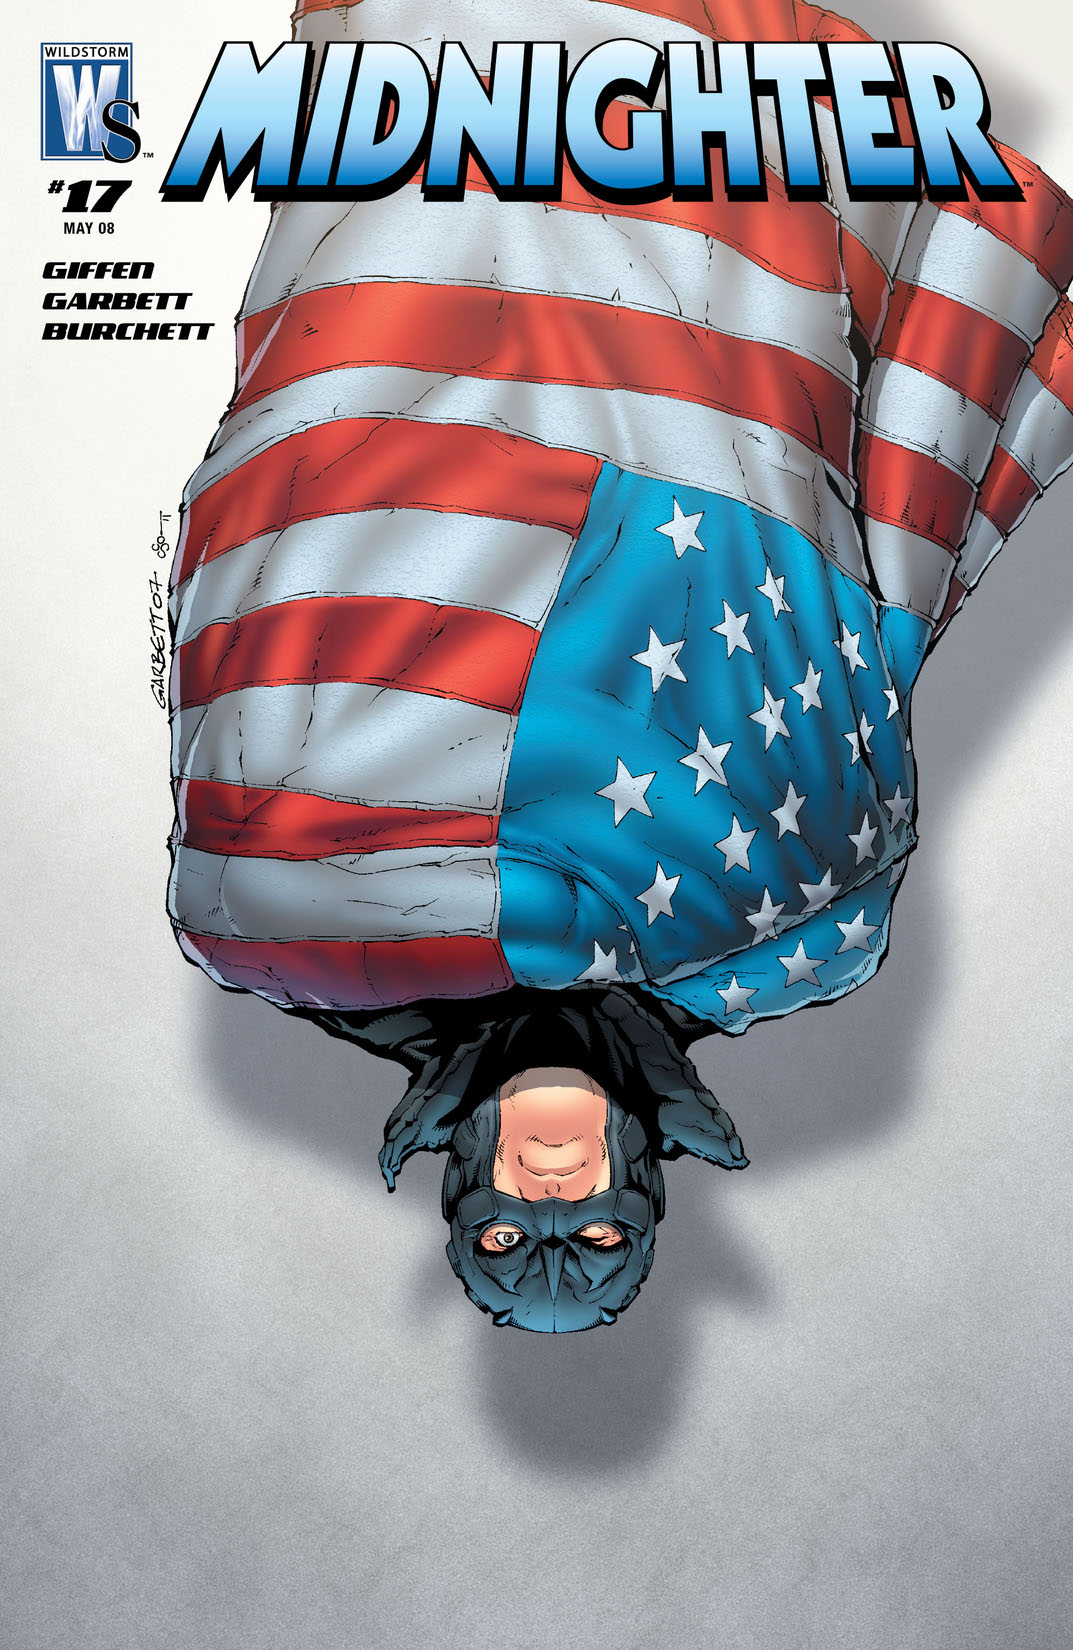 Midnighter (2006-) #17 preview images